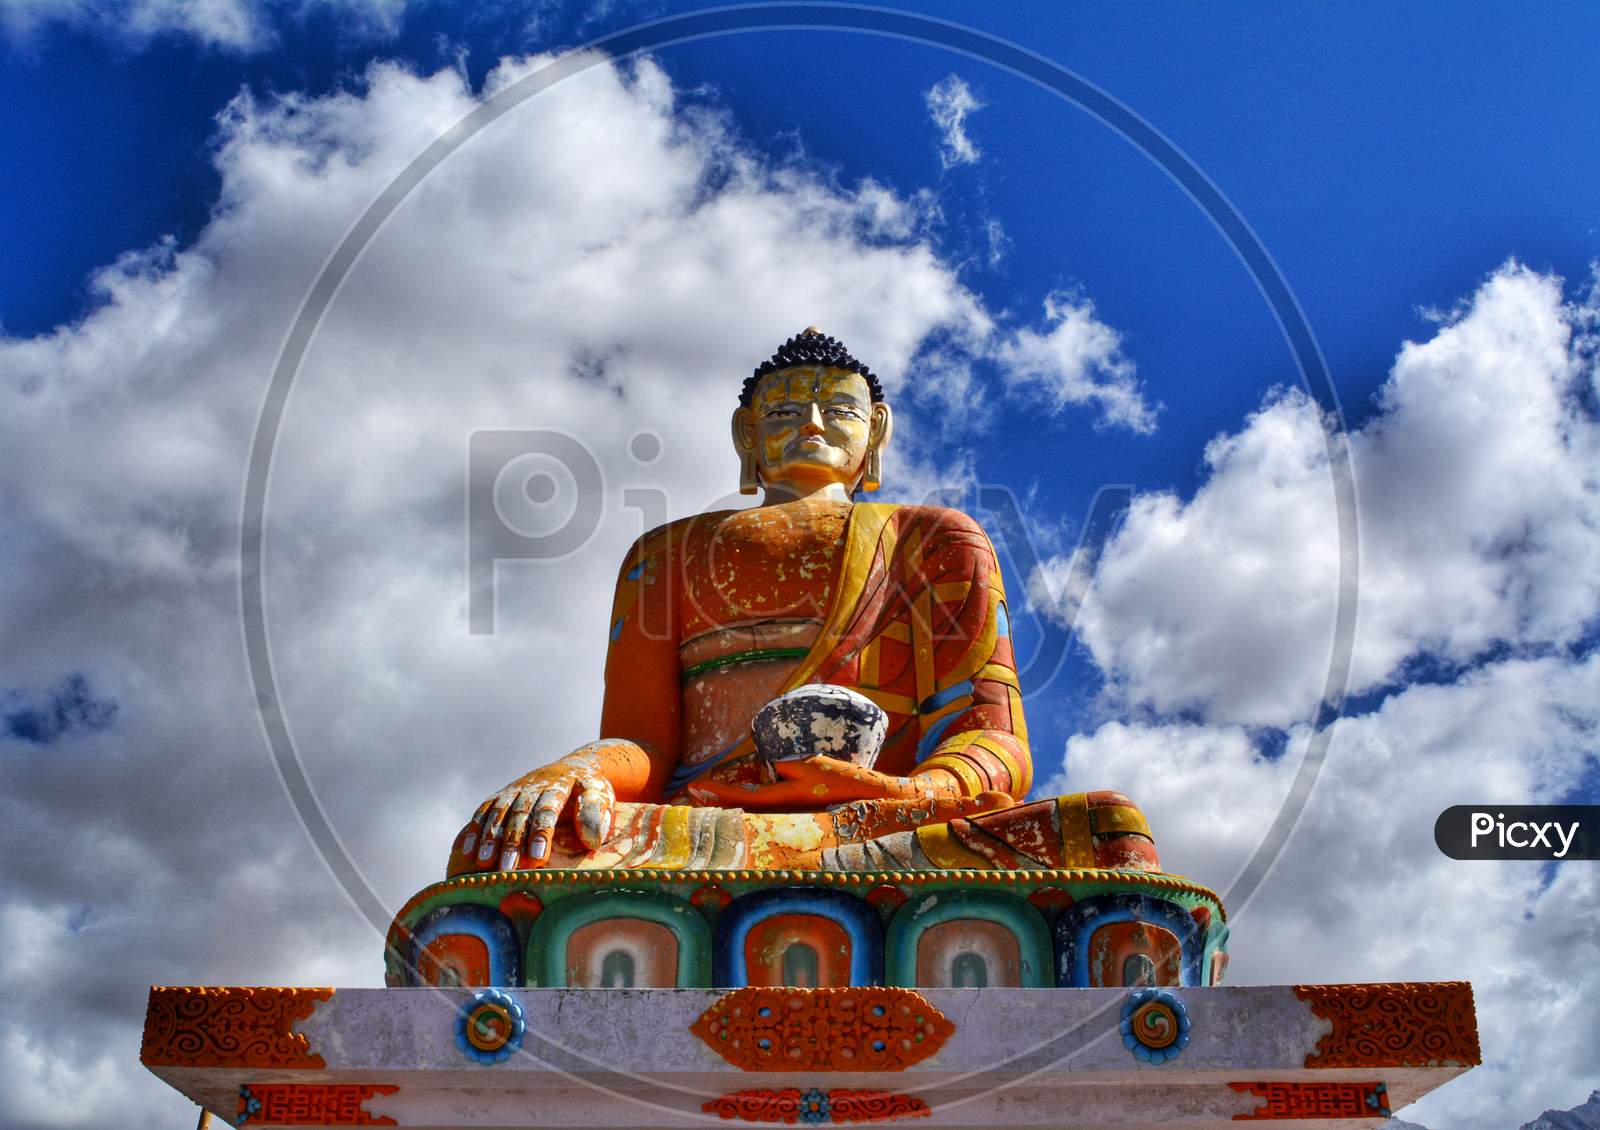 Huge Buddha statue at Langza in Spiti Valley